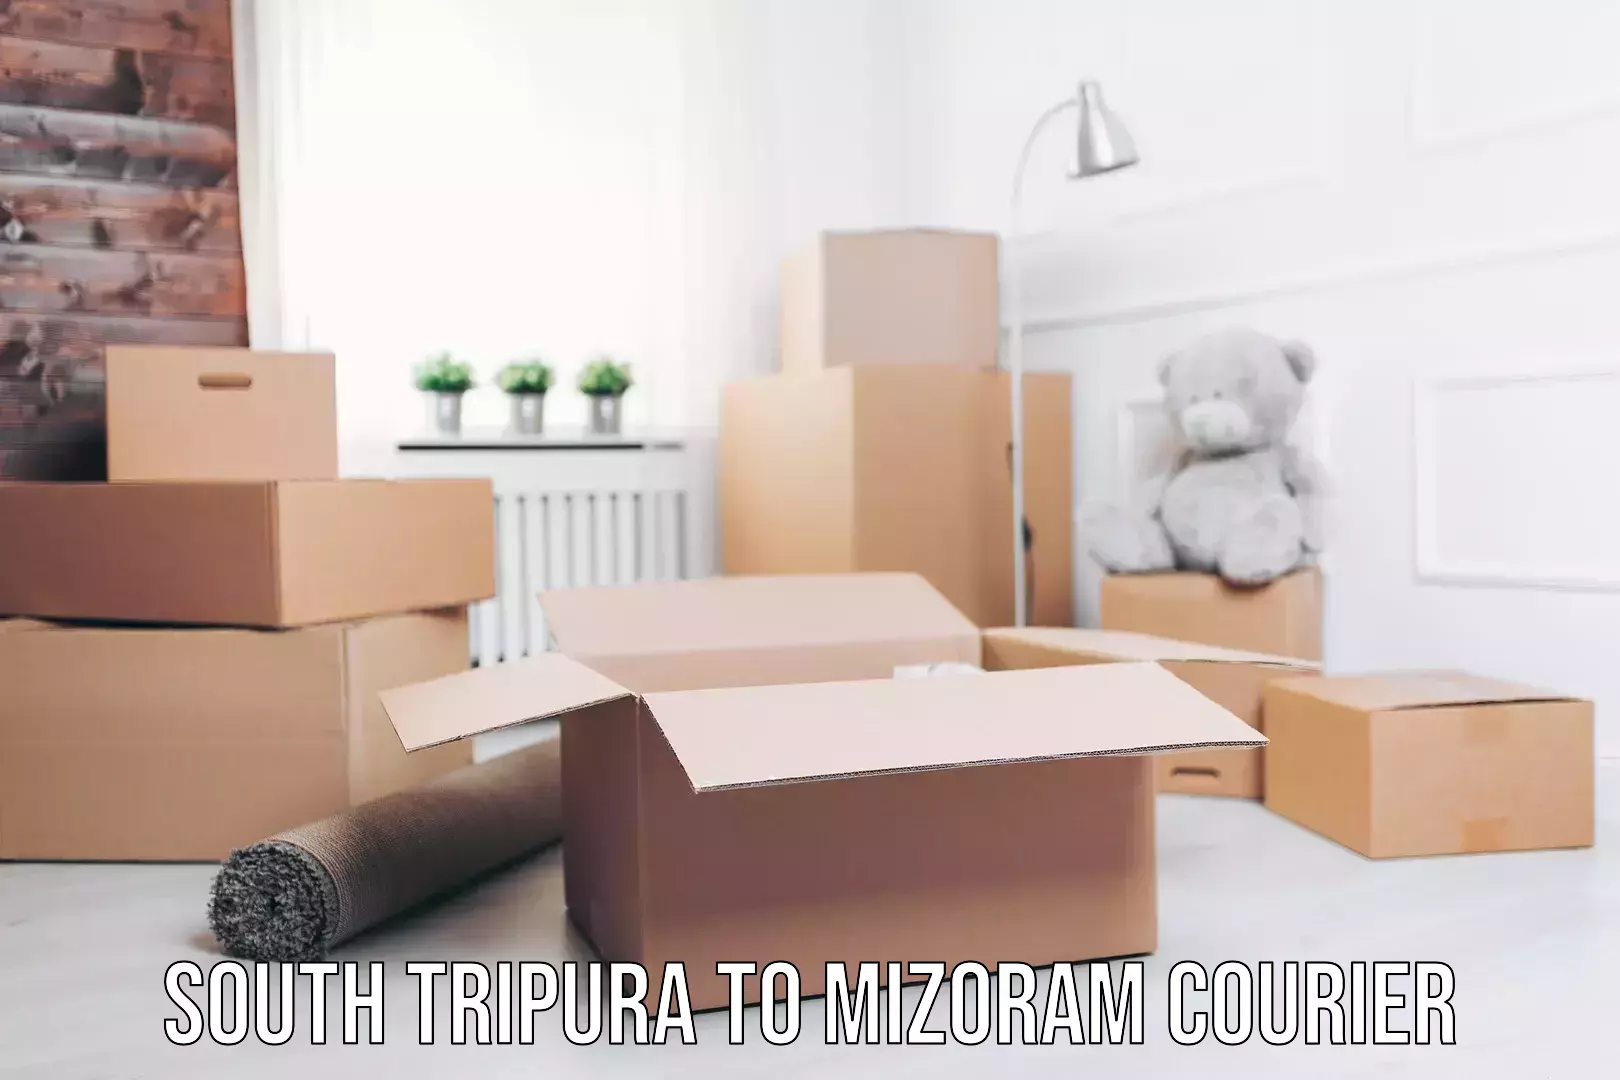 Parcel delivery automation South Tripura to Mizoram